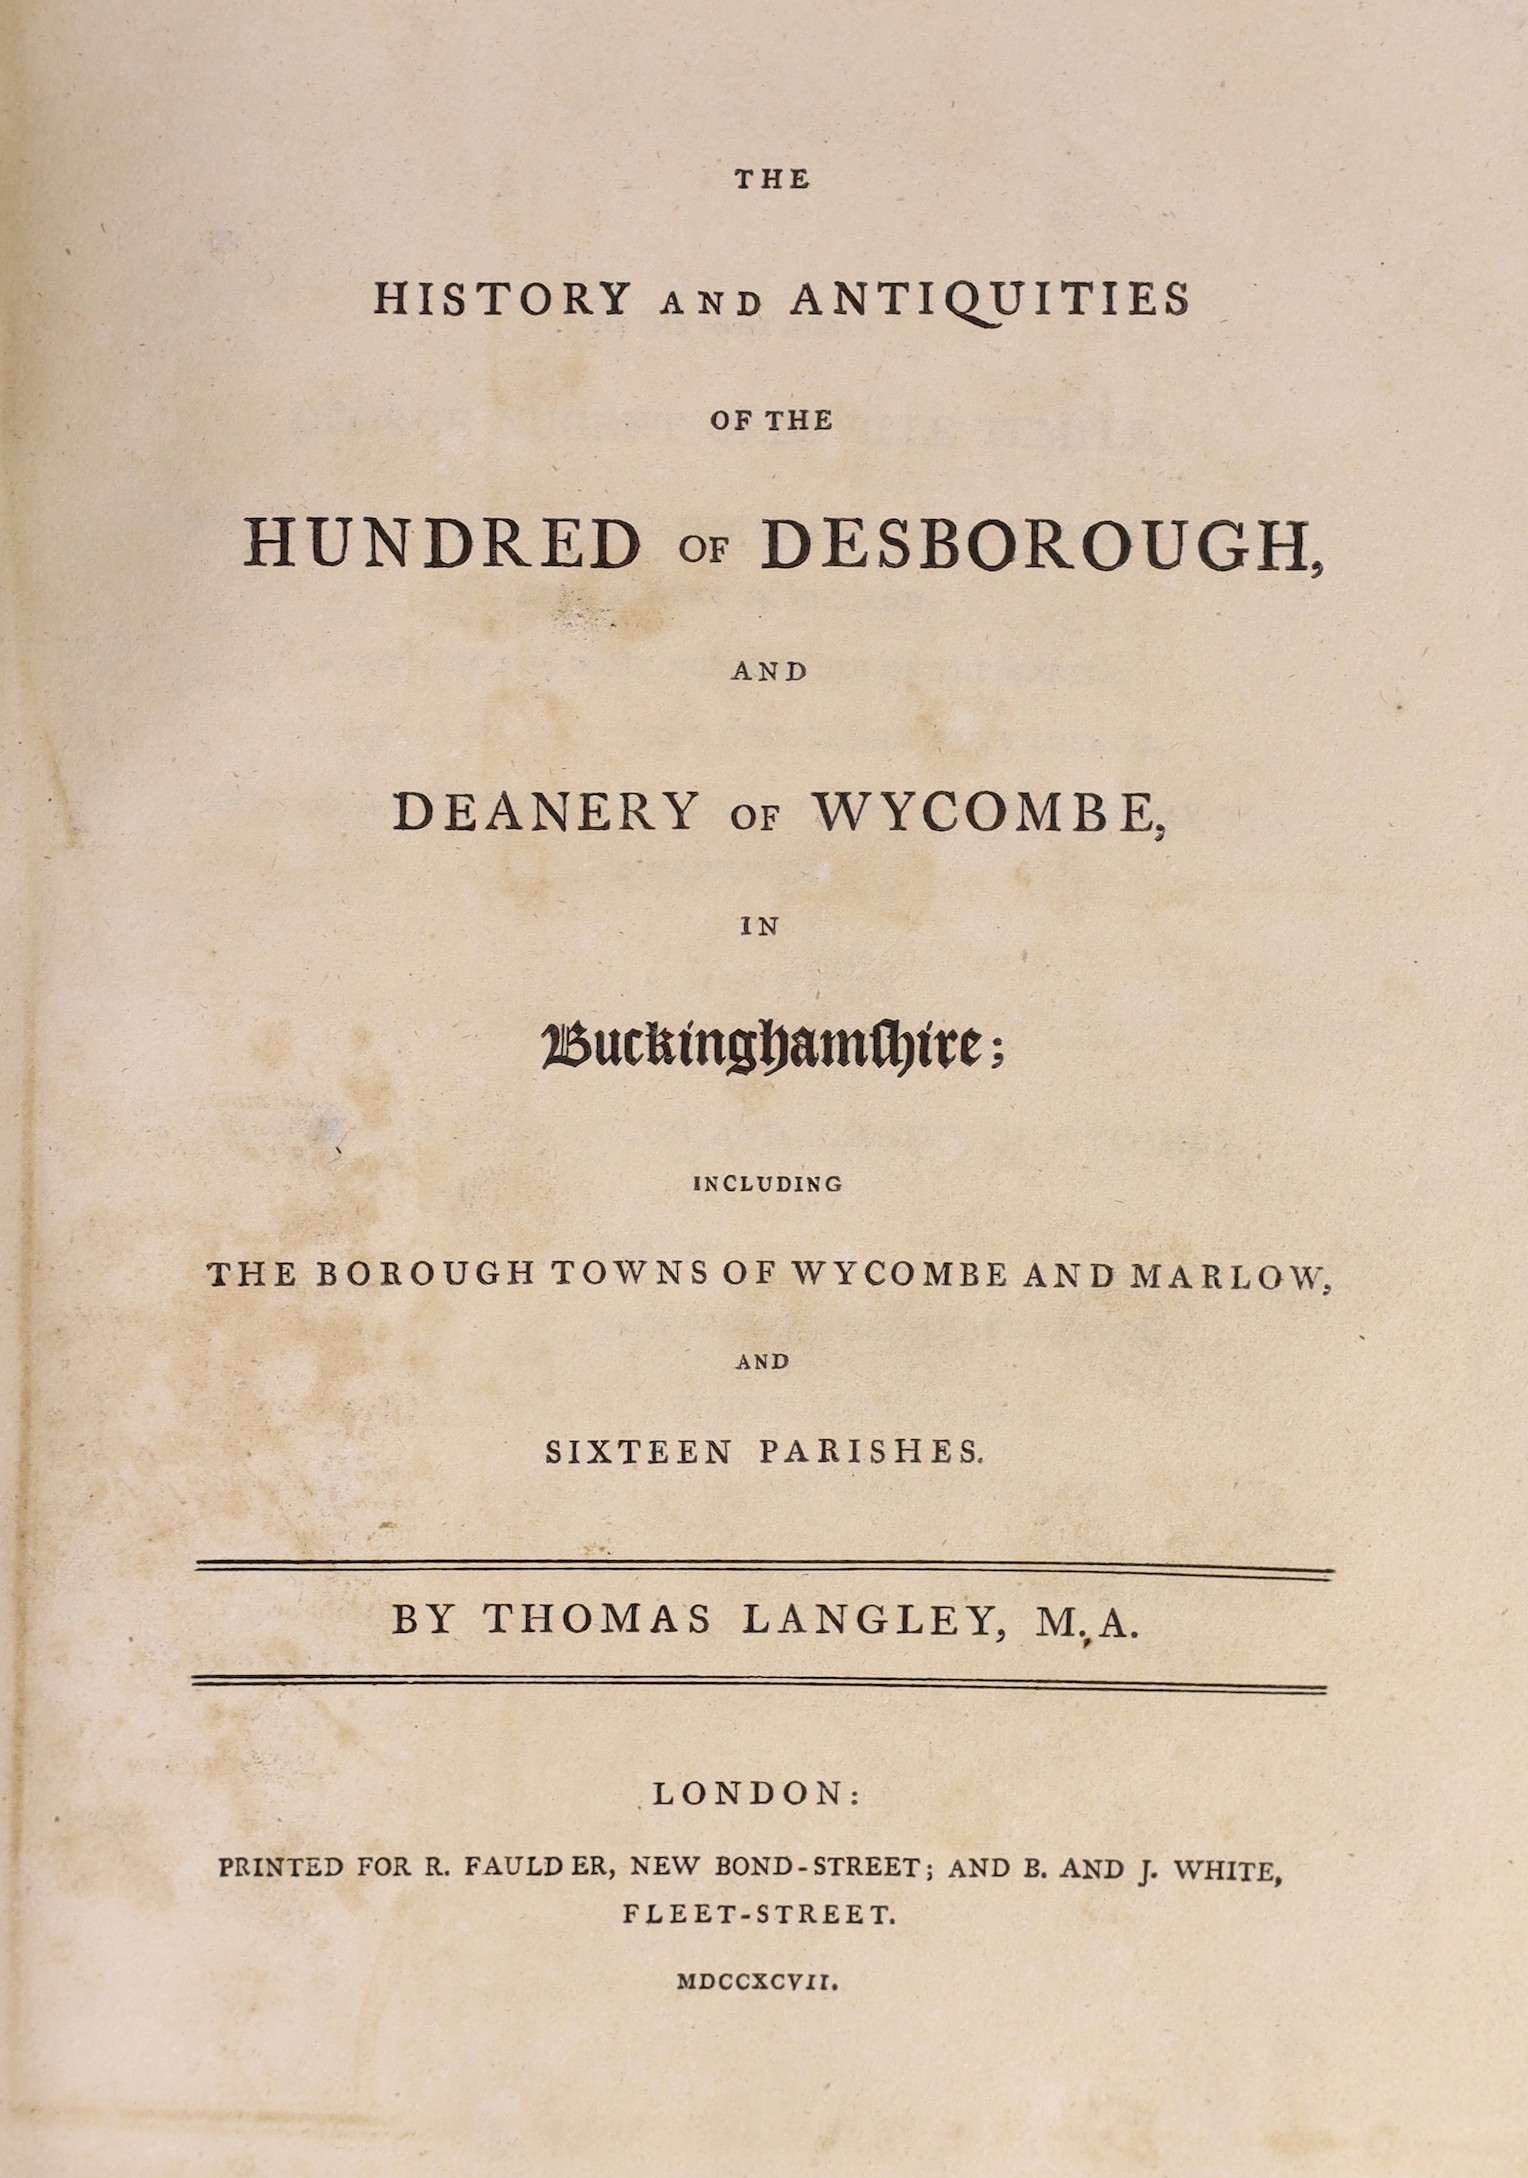 BUCKINGHAMSHIRE - Langley, Thomas - The History and Antiquities of the Hundred of Desborough and Deanery of Wycombe, in Buckinghamshire, 4to, original half calf, with map, 3 plates and 2 tables, all folding, London, 1797